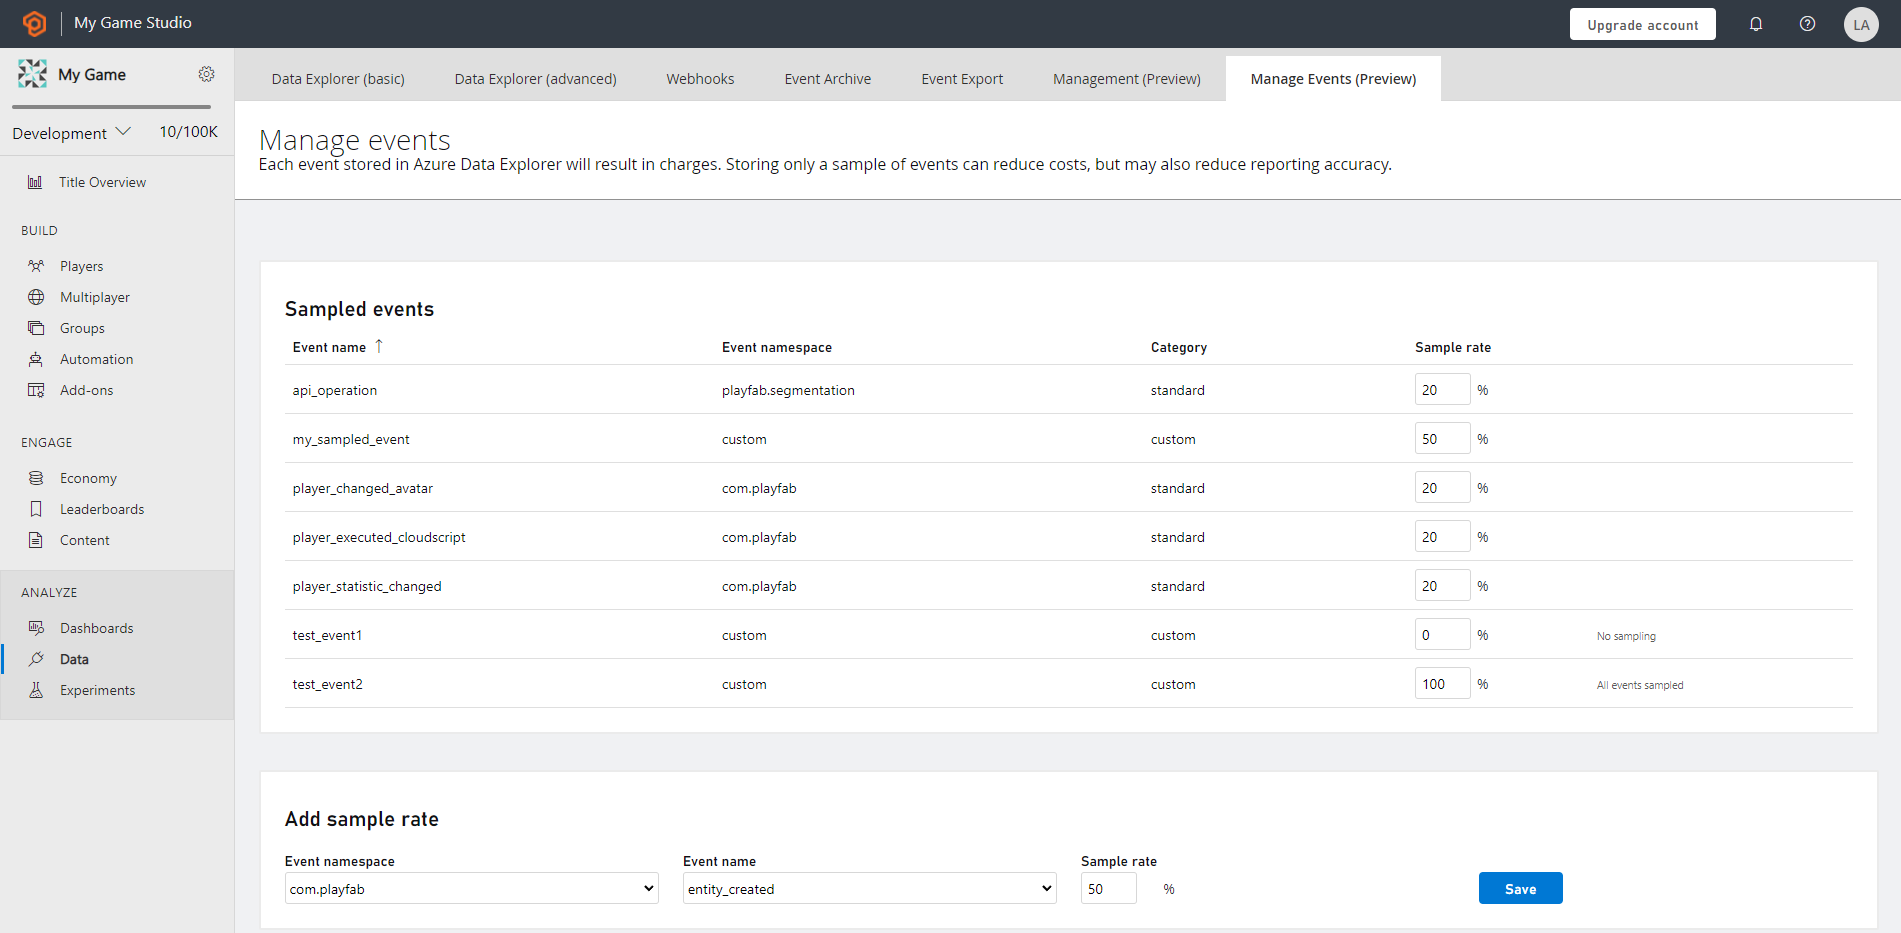 Screenshot of Manage Events Overview